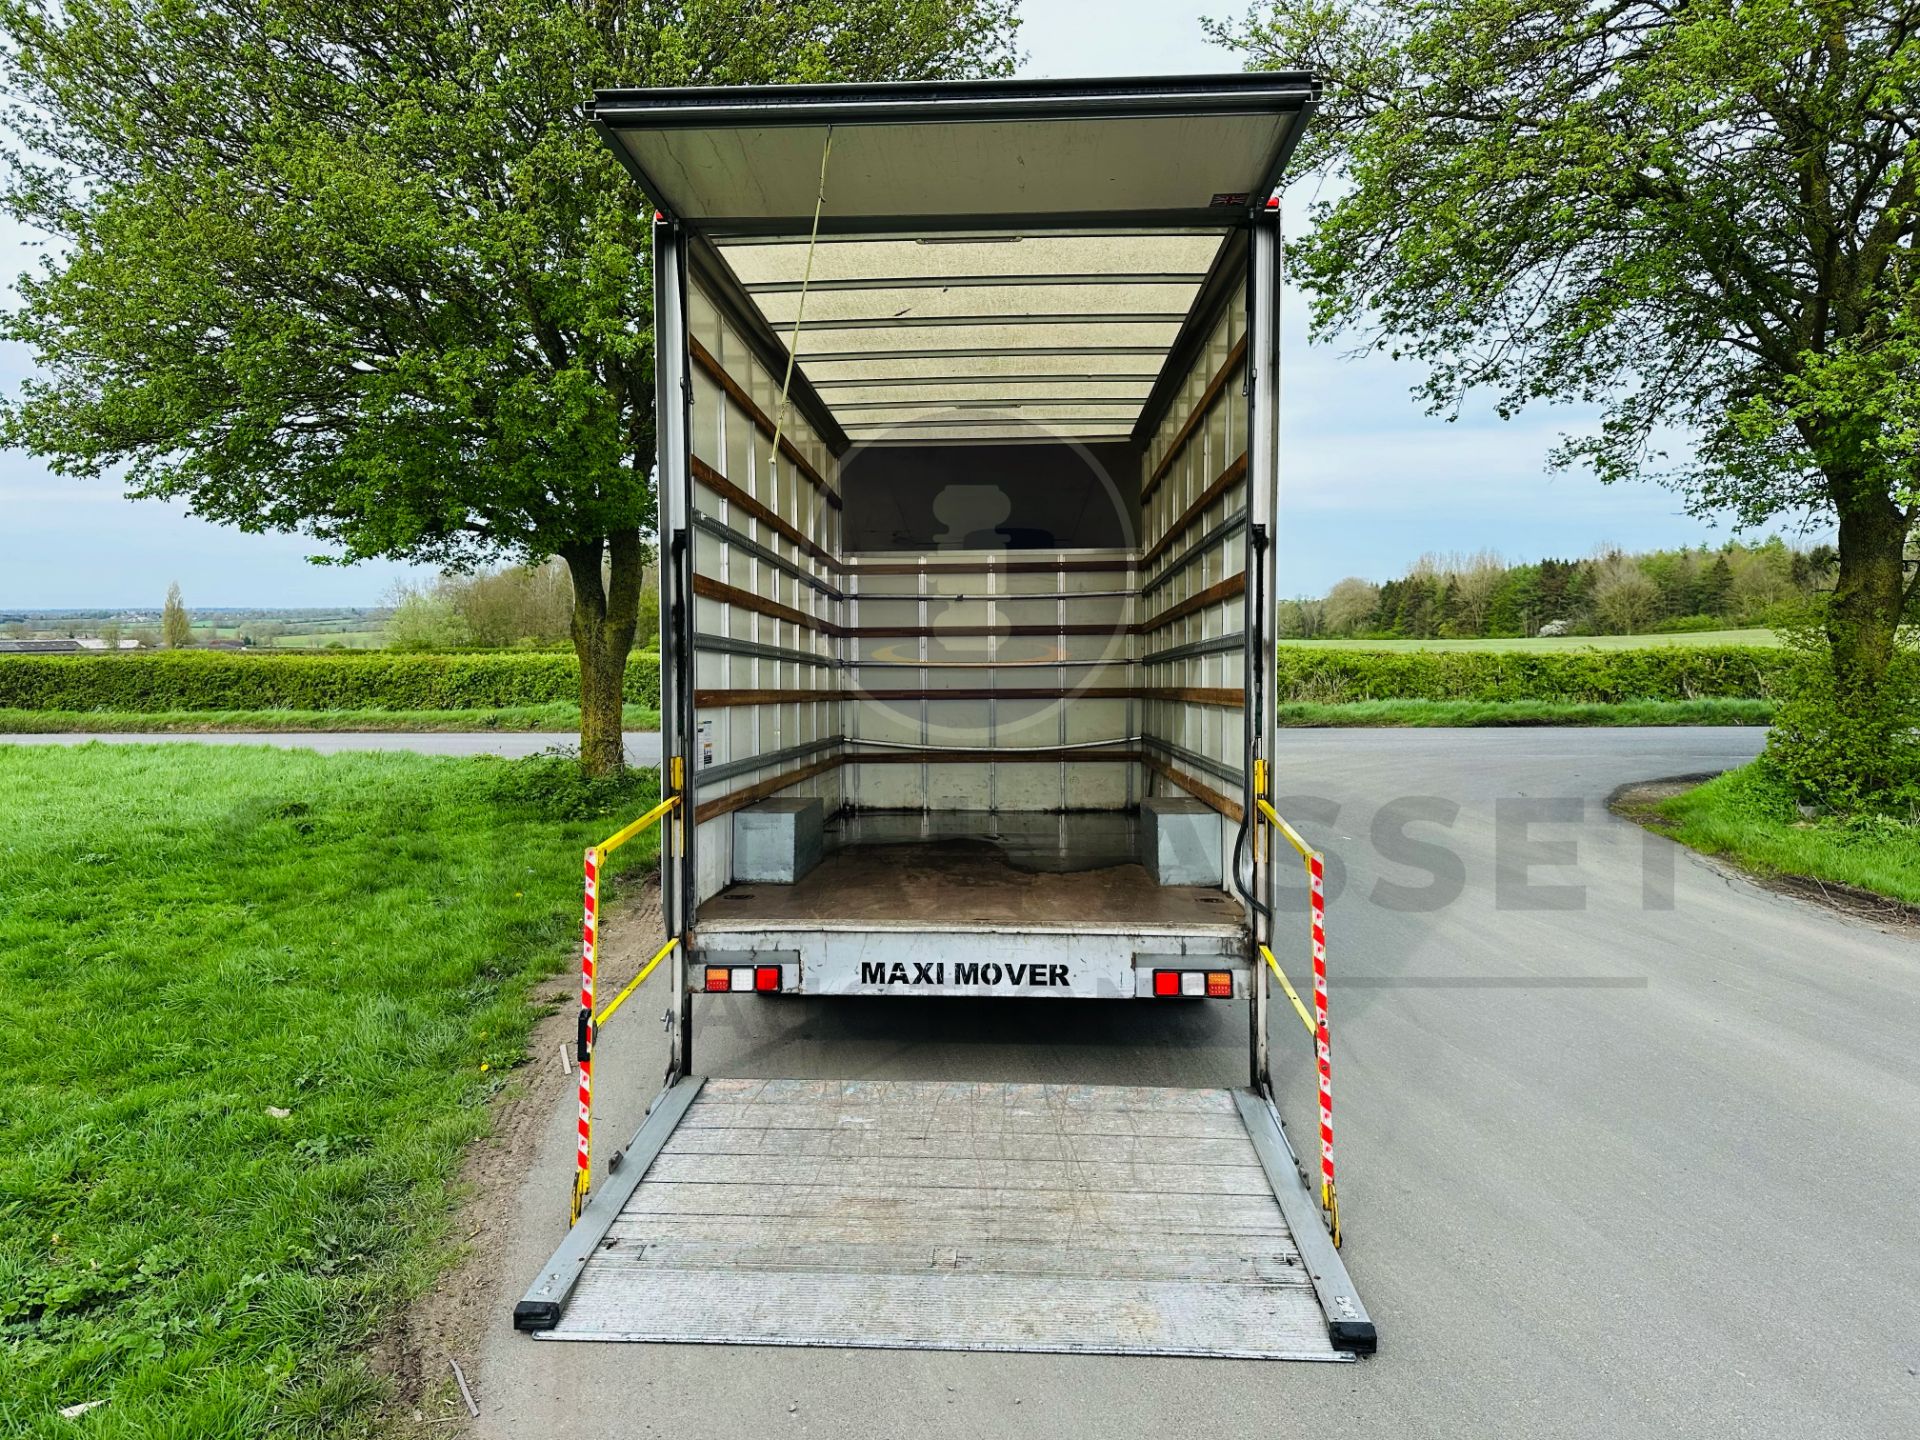 PEUGEOT BOXER 335 *LWB - LOW LOADER / MAXI MOVER LUTON* (2019 - EURO 6) 2.0 BLUE HDI - 6 SPEED *A/C* - Image 9 of 27